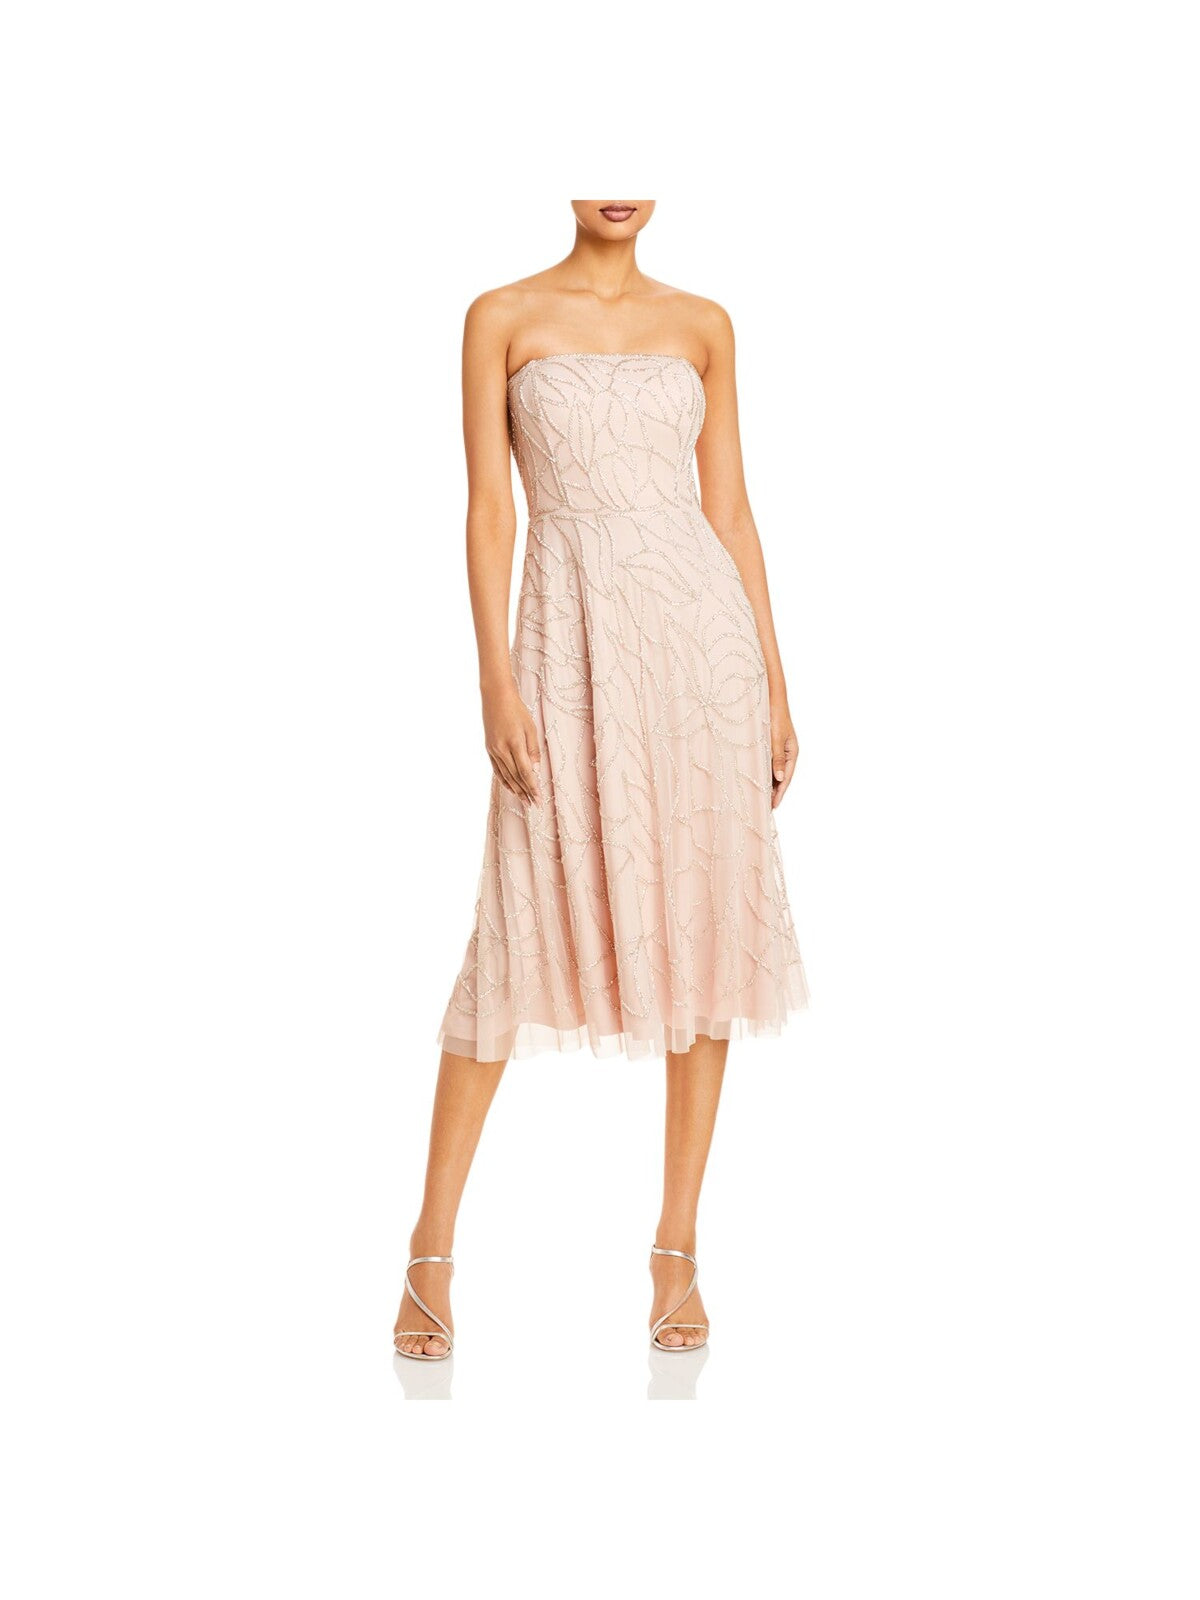 AIDAN MATTOX Womens Pink Beaded Zippered Sheer Lined Printed Sleeveless Strapless Below The Knee Cocktail Fit + Flare Dress 12